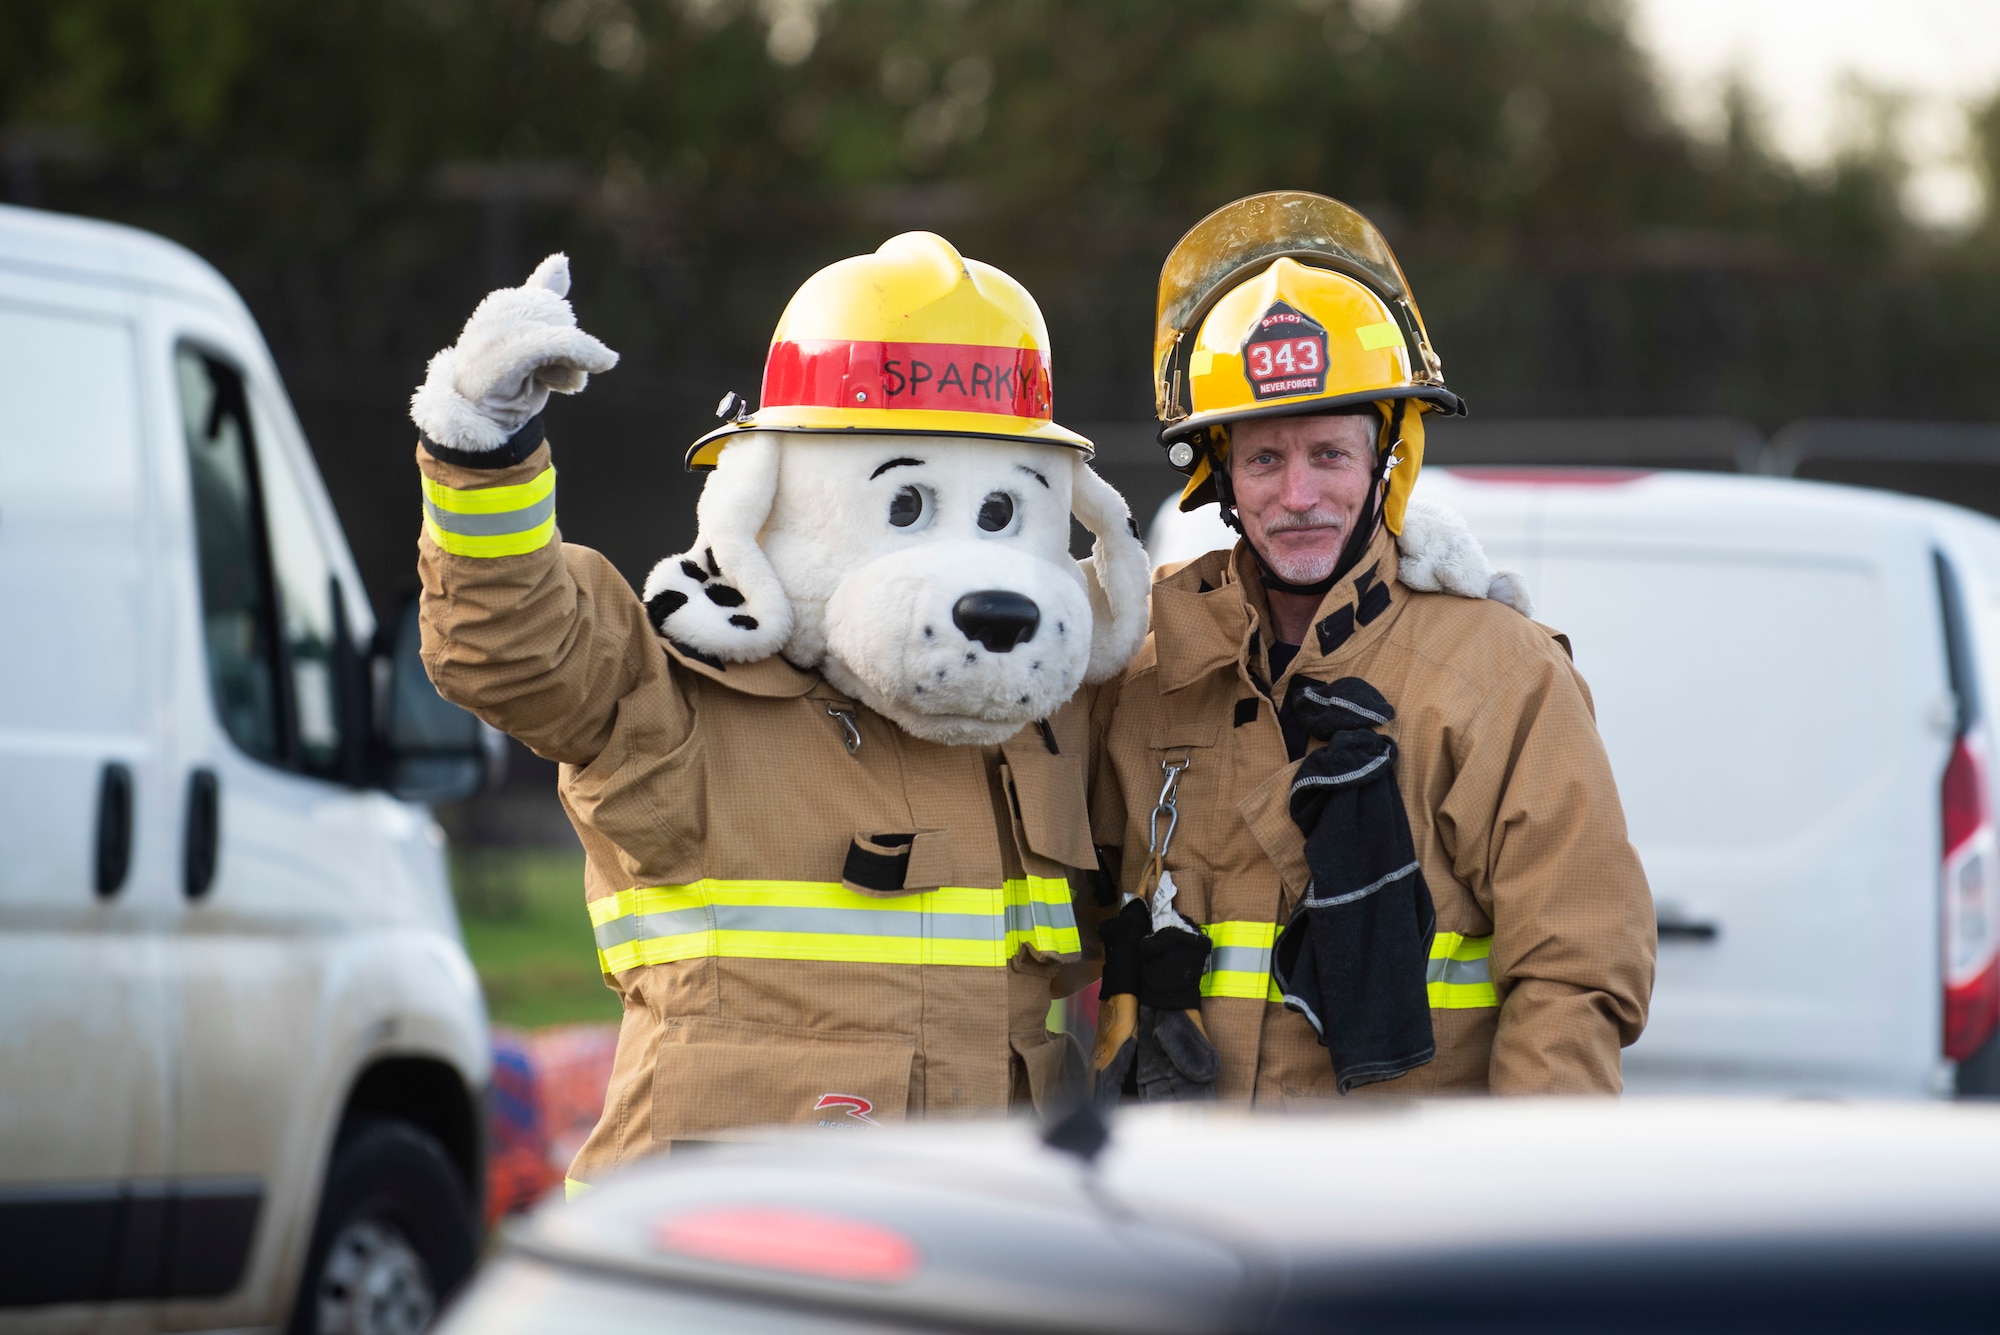 Sparky the Fire Dog and Bob Ratcliffe, 423rd Civil Engineer Squadron firefighter, pose for a photo at RAF Molesworth, England, Oct. 6, 2020 during Fire Prevention Week 2020. Since 1922, national Fire Prevention Week is intended to educate the public about the importance of pre-planning actions they should take to keep themselves and their families safe from fire mishap. (U.S. Air Force photo by Senior Airman Jennifer Zima)